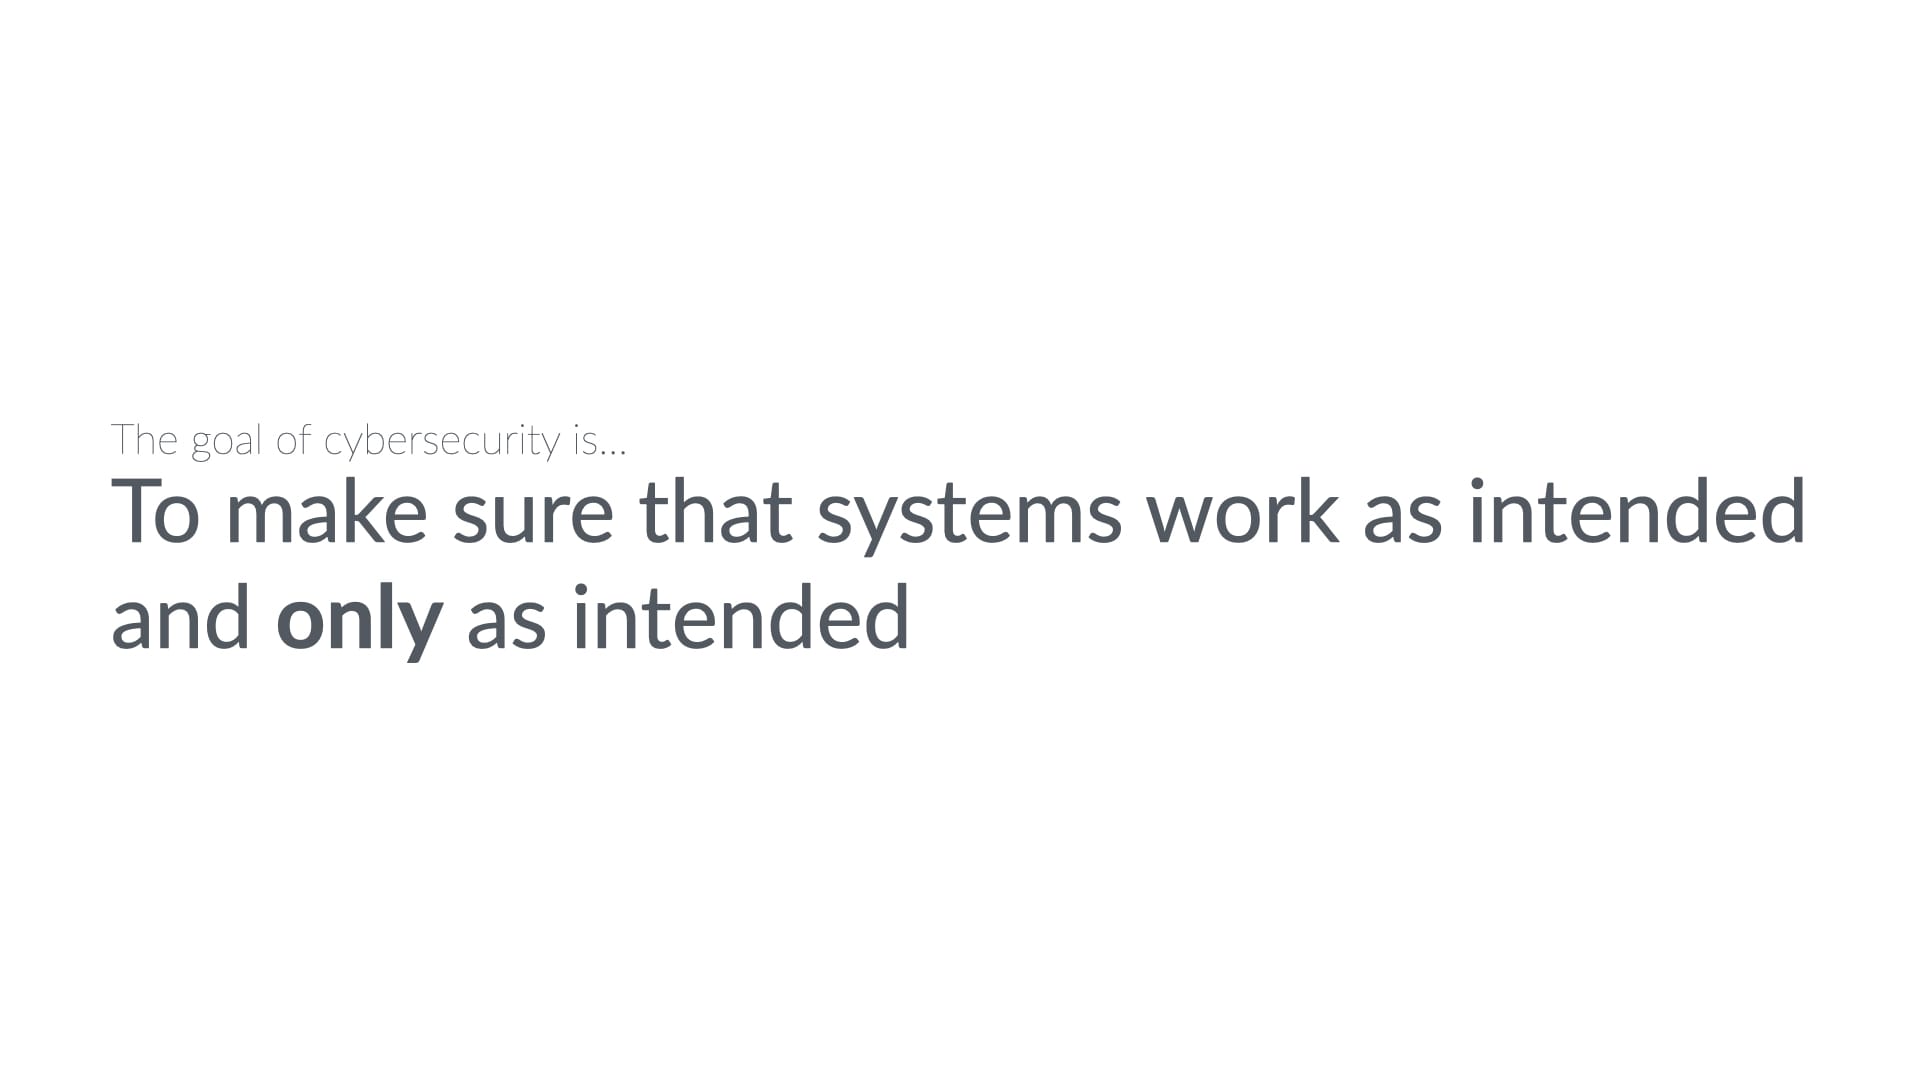 The goal of cybersecurity: To make sure that systems work as intended and only as intended